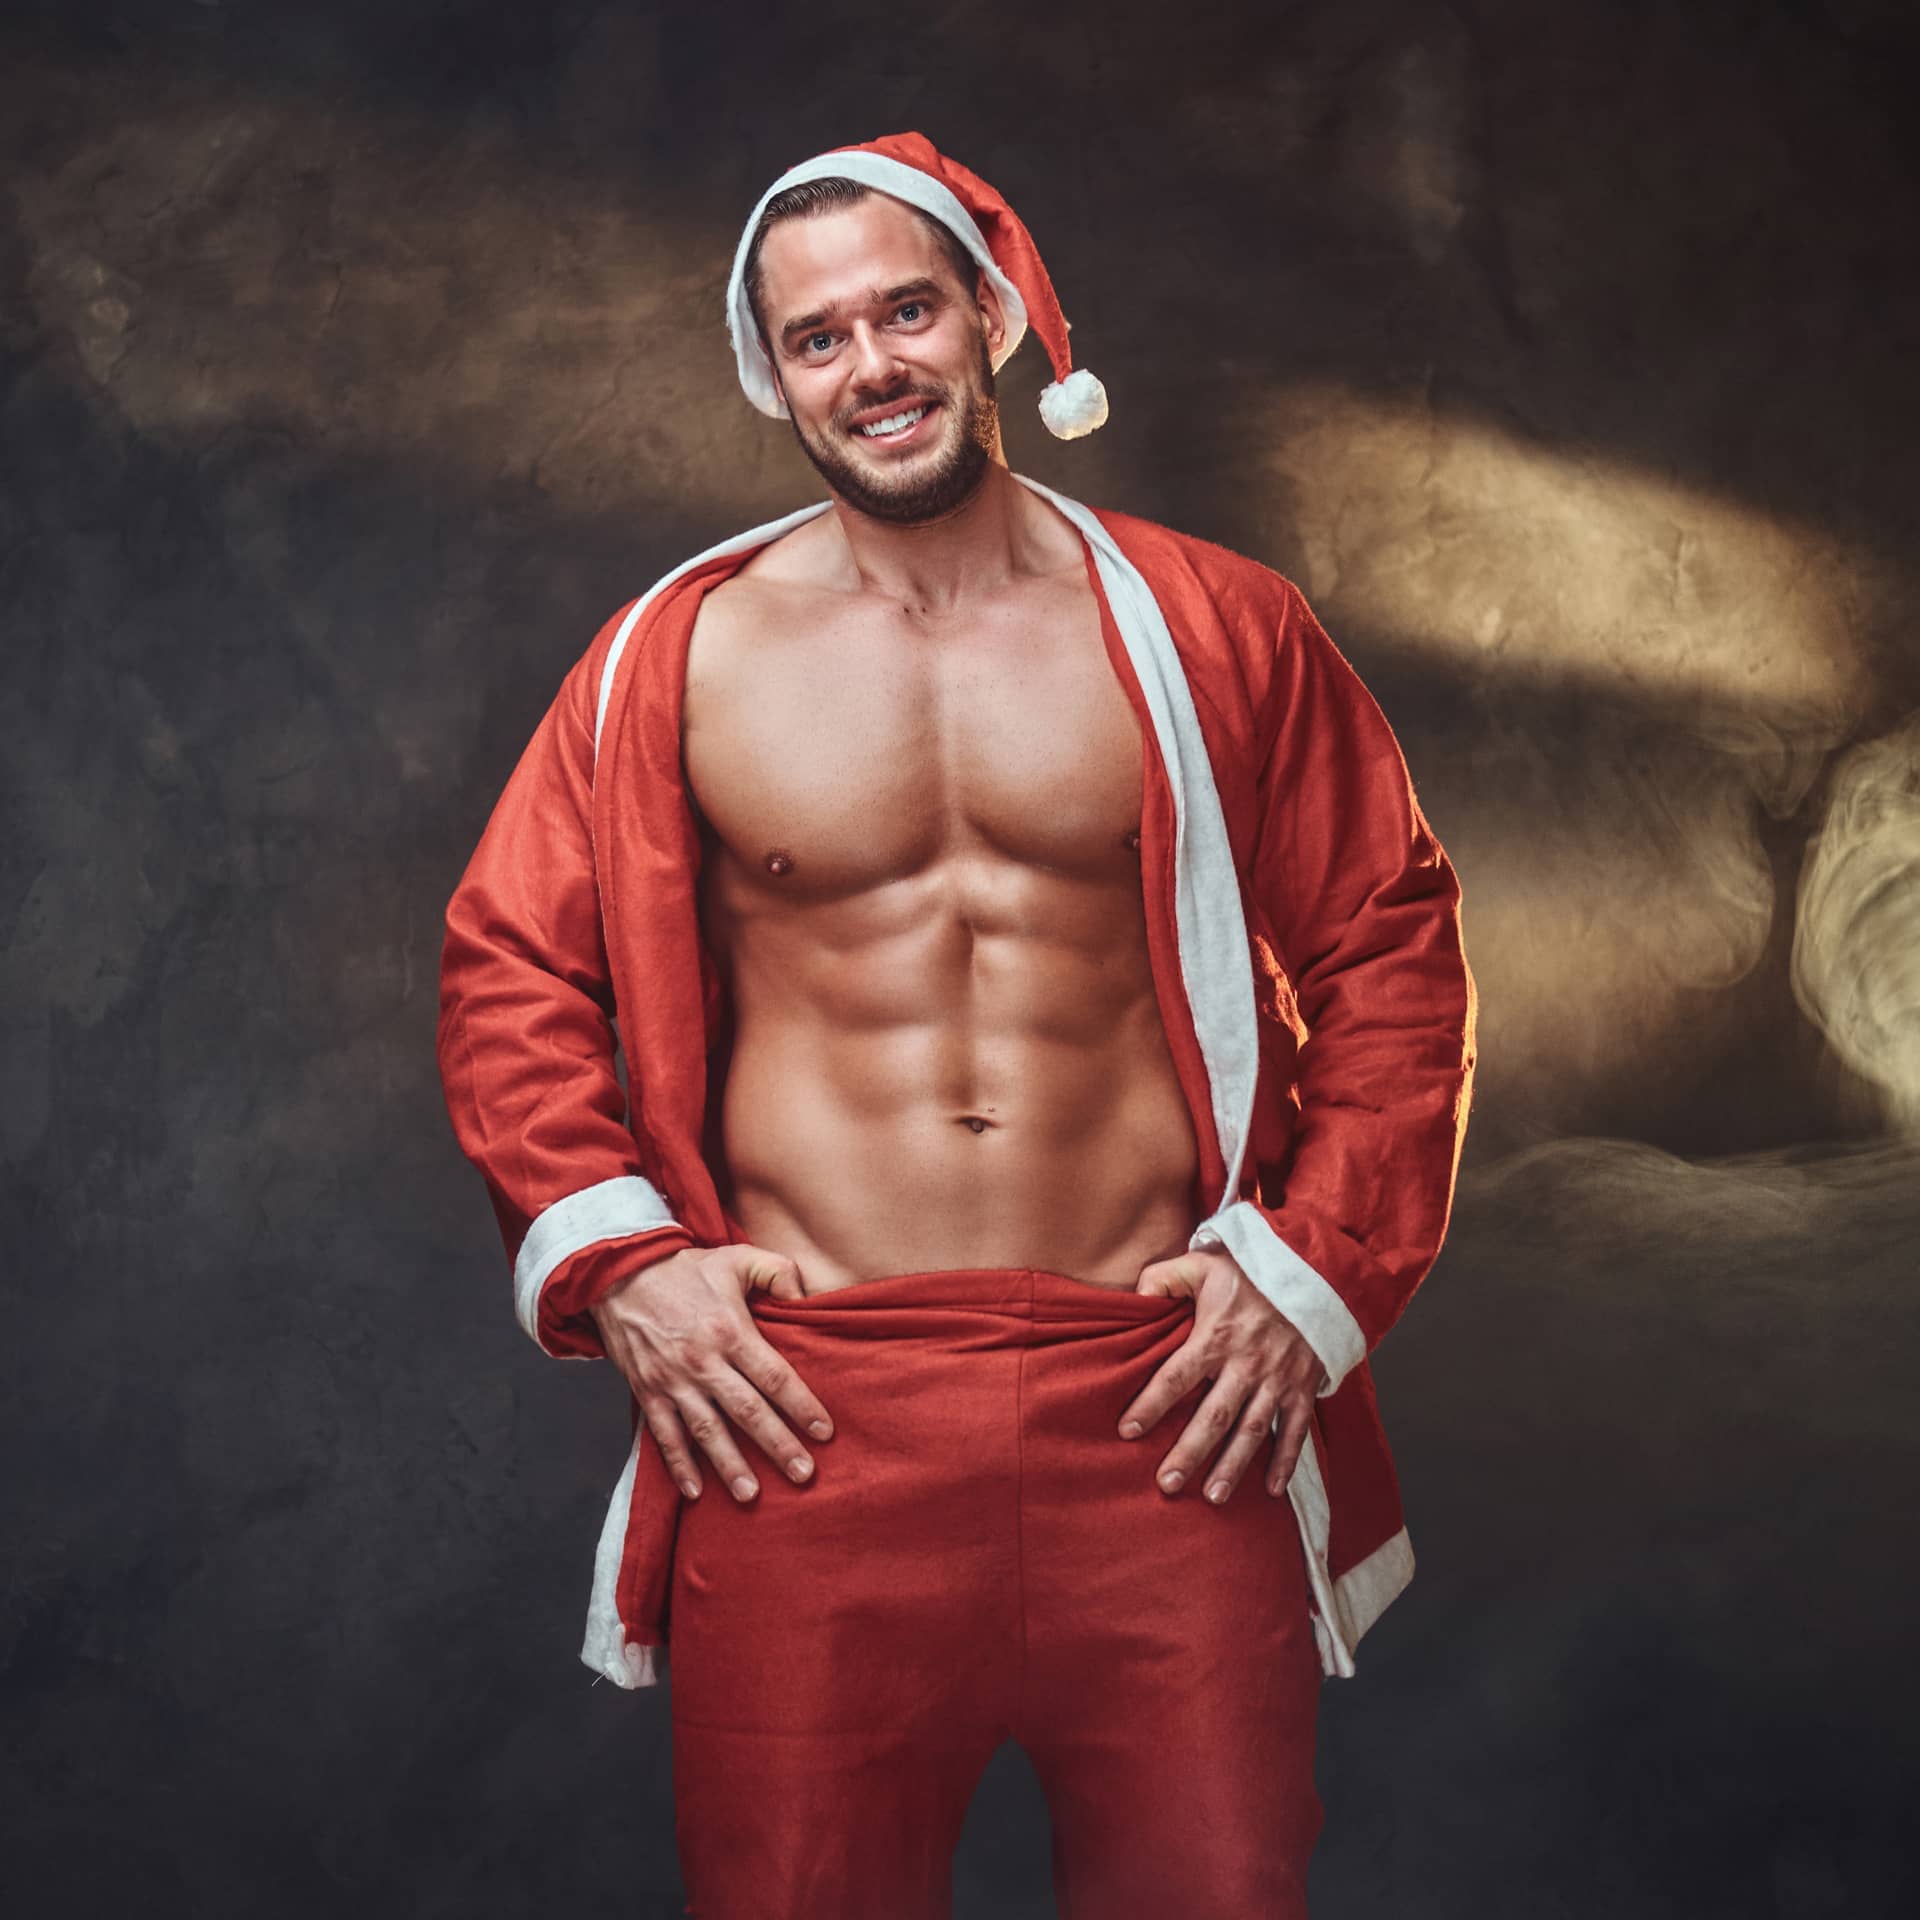 Sexy shirtless santa traditional red costume is posing photo studio